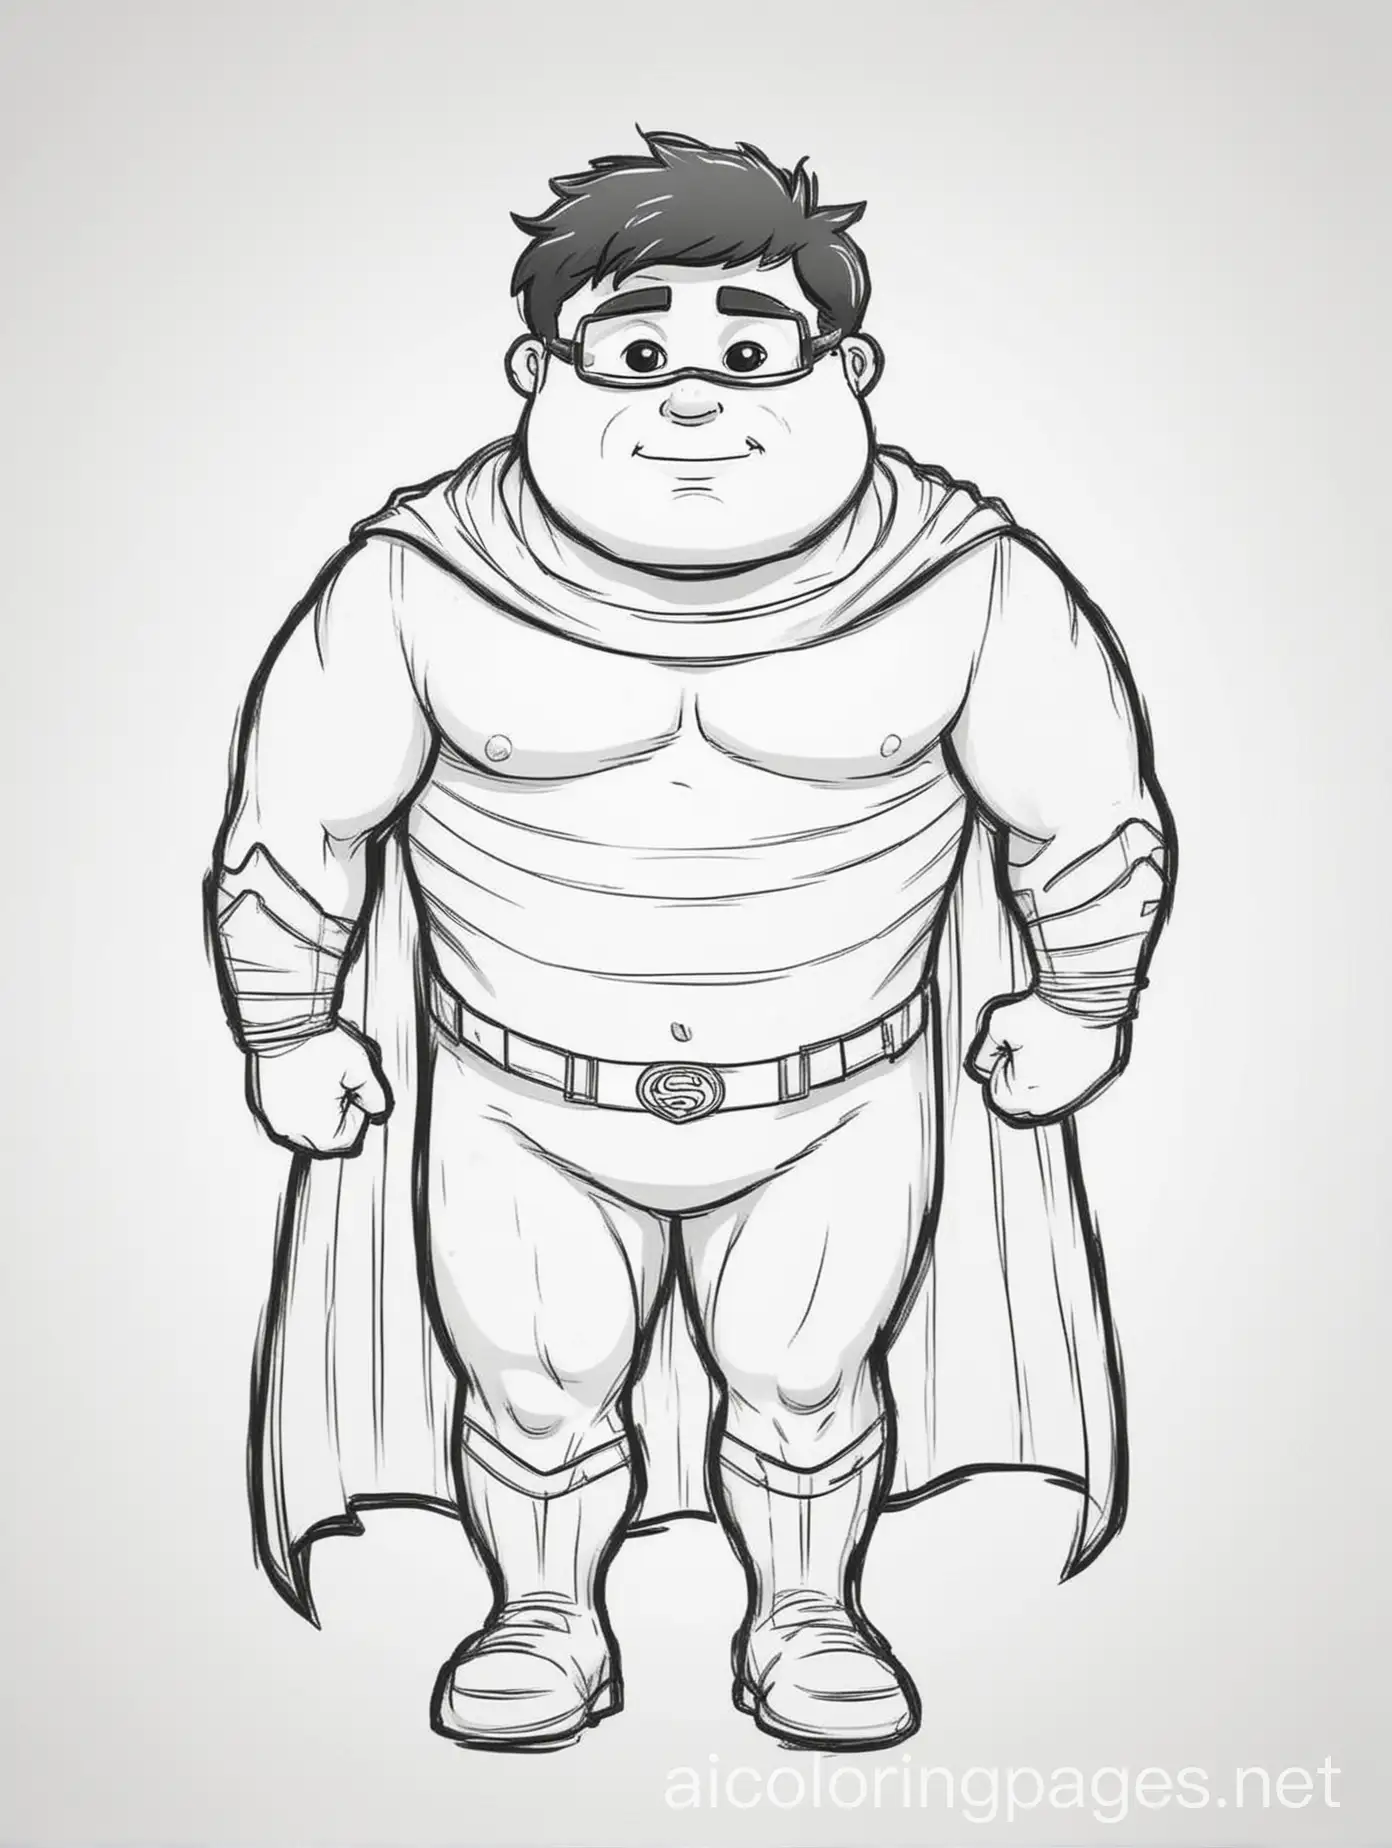 Chubby-Superhero-Coloring-Page-for-Kids-Black-and-White-Line-Art-with-Ample-White-Space